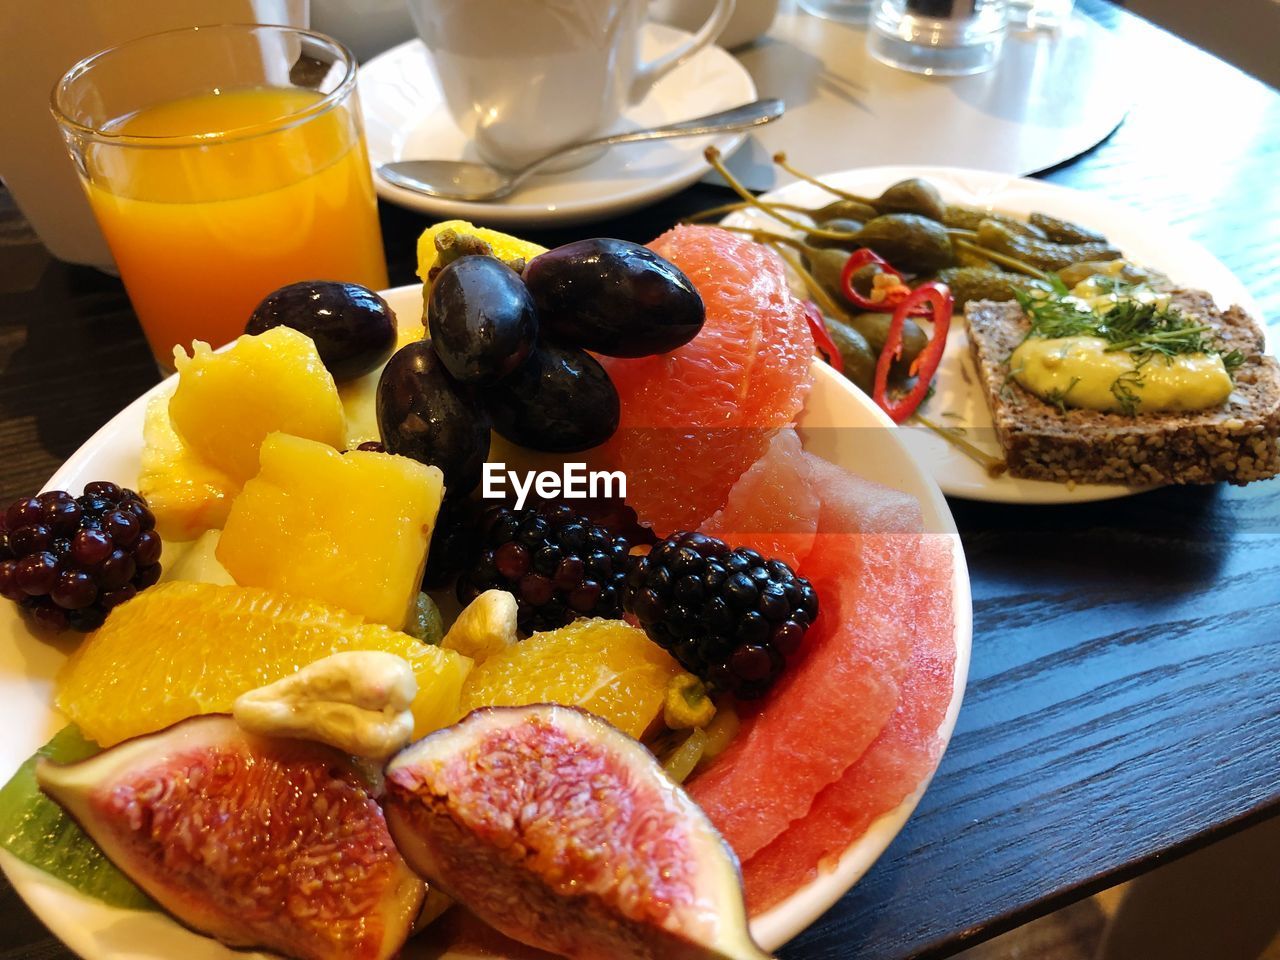 CLOSE-UP OF BREAKFAST SERVED IN PLATE